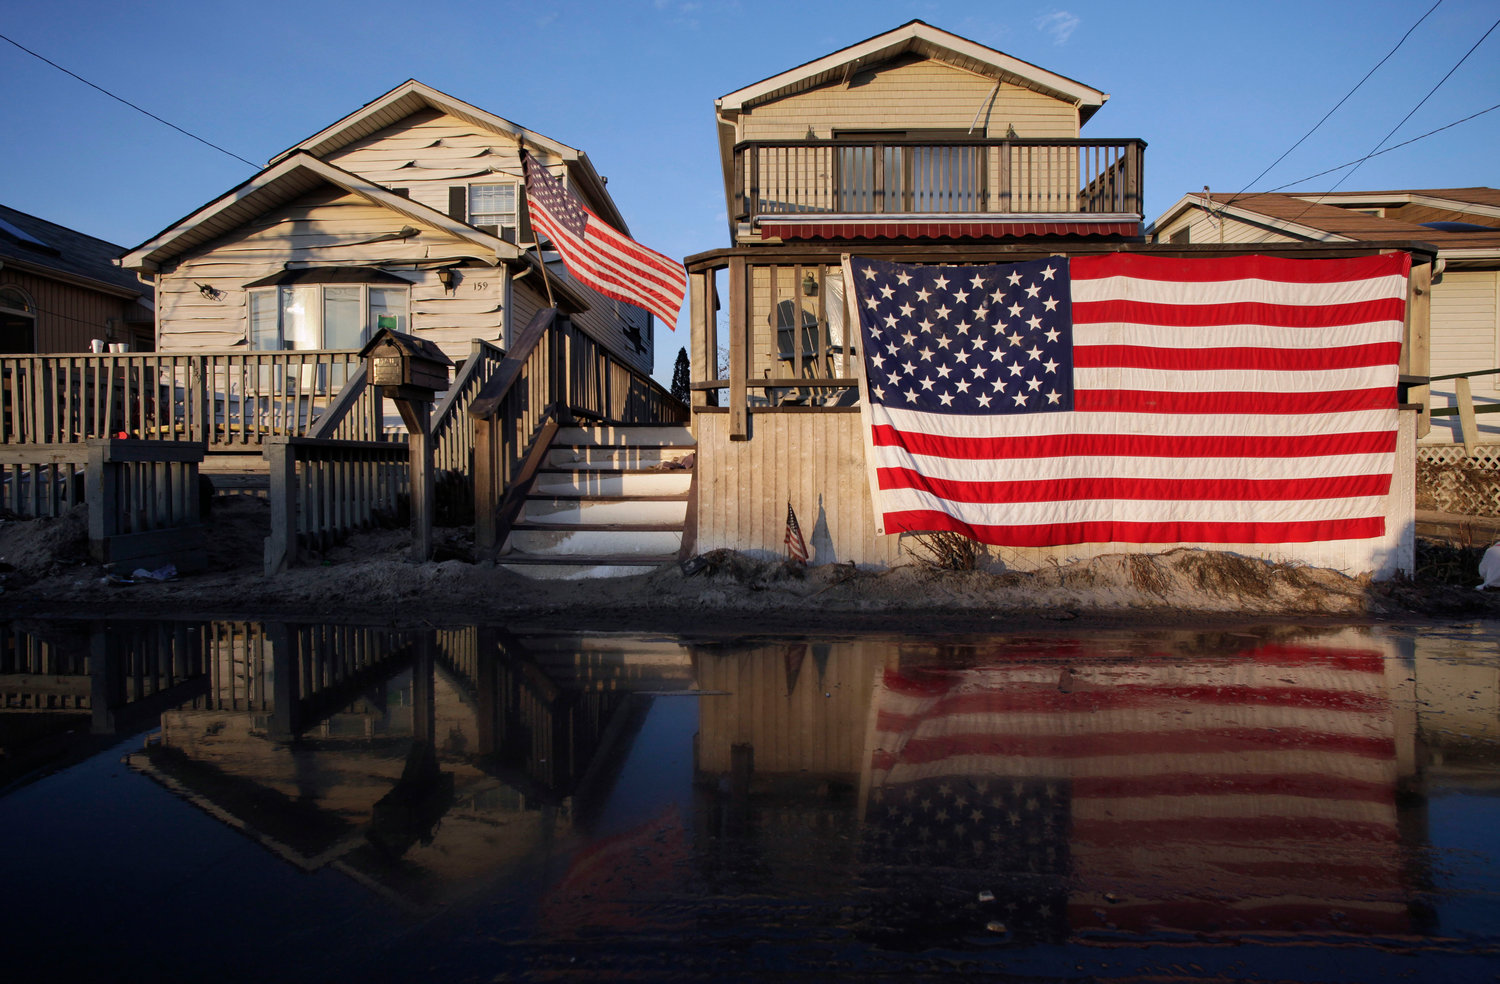 FILE - United States flags are displayed on flood-damaged homes in the Breezy Point section of Queens, N.Y., on Nov. 28, 2012. 90% of counties in the U.S. experienced a weather-related disaster between 2011-2021, according to a report published on Wednesday, Nov. 16, 2022. Over 300 million people ‚Äî 93% of the country‚Äôs population ‚Äî live in those counties. (AP Photo/Mark Lennihan, File)